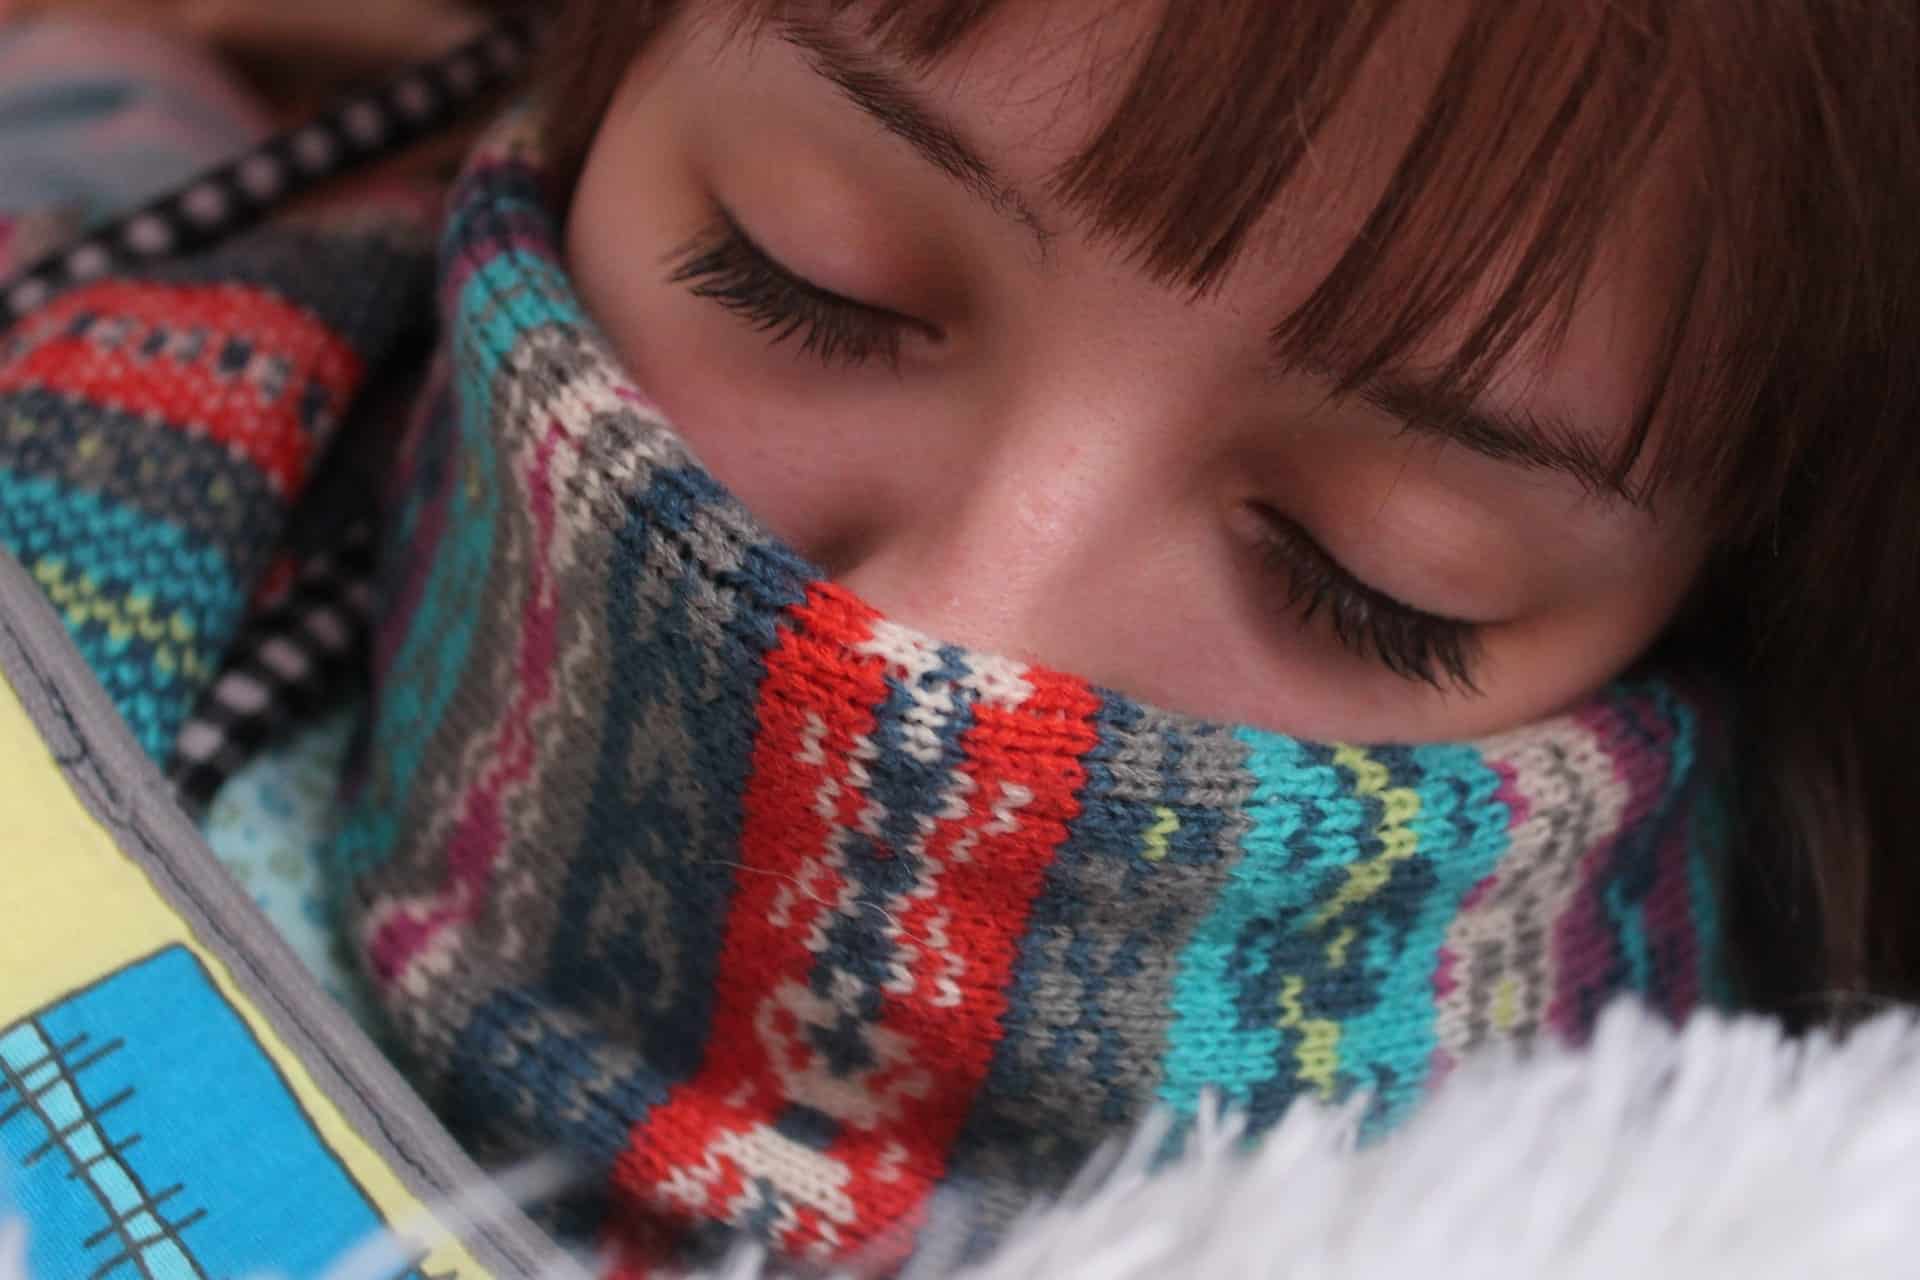 A woman wraps up with a scarf and blankets to avoid the cold